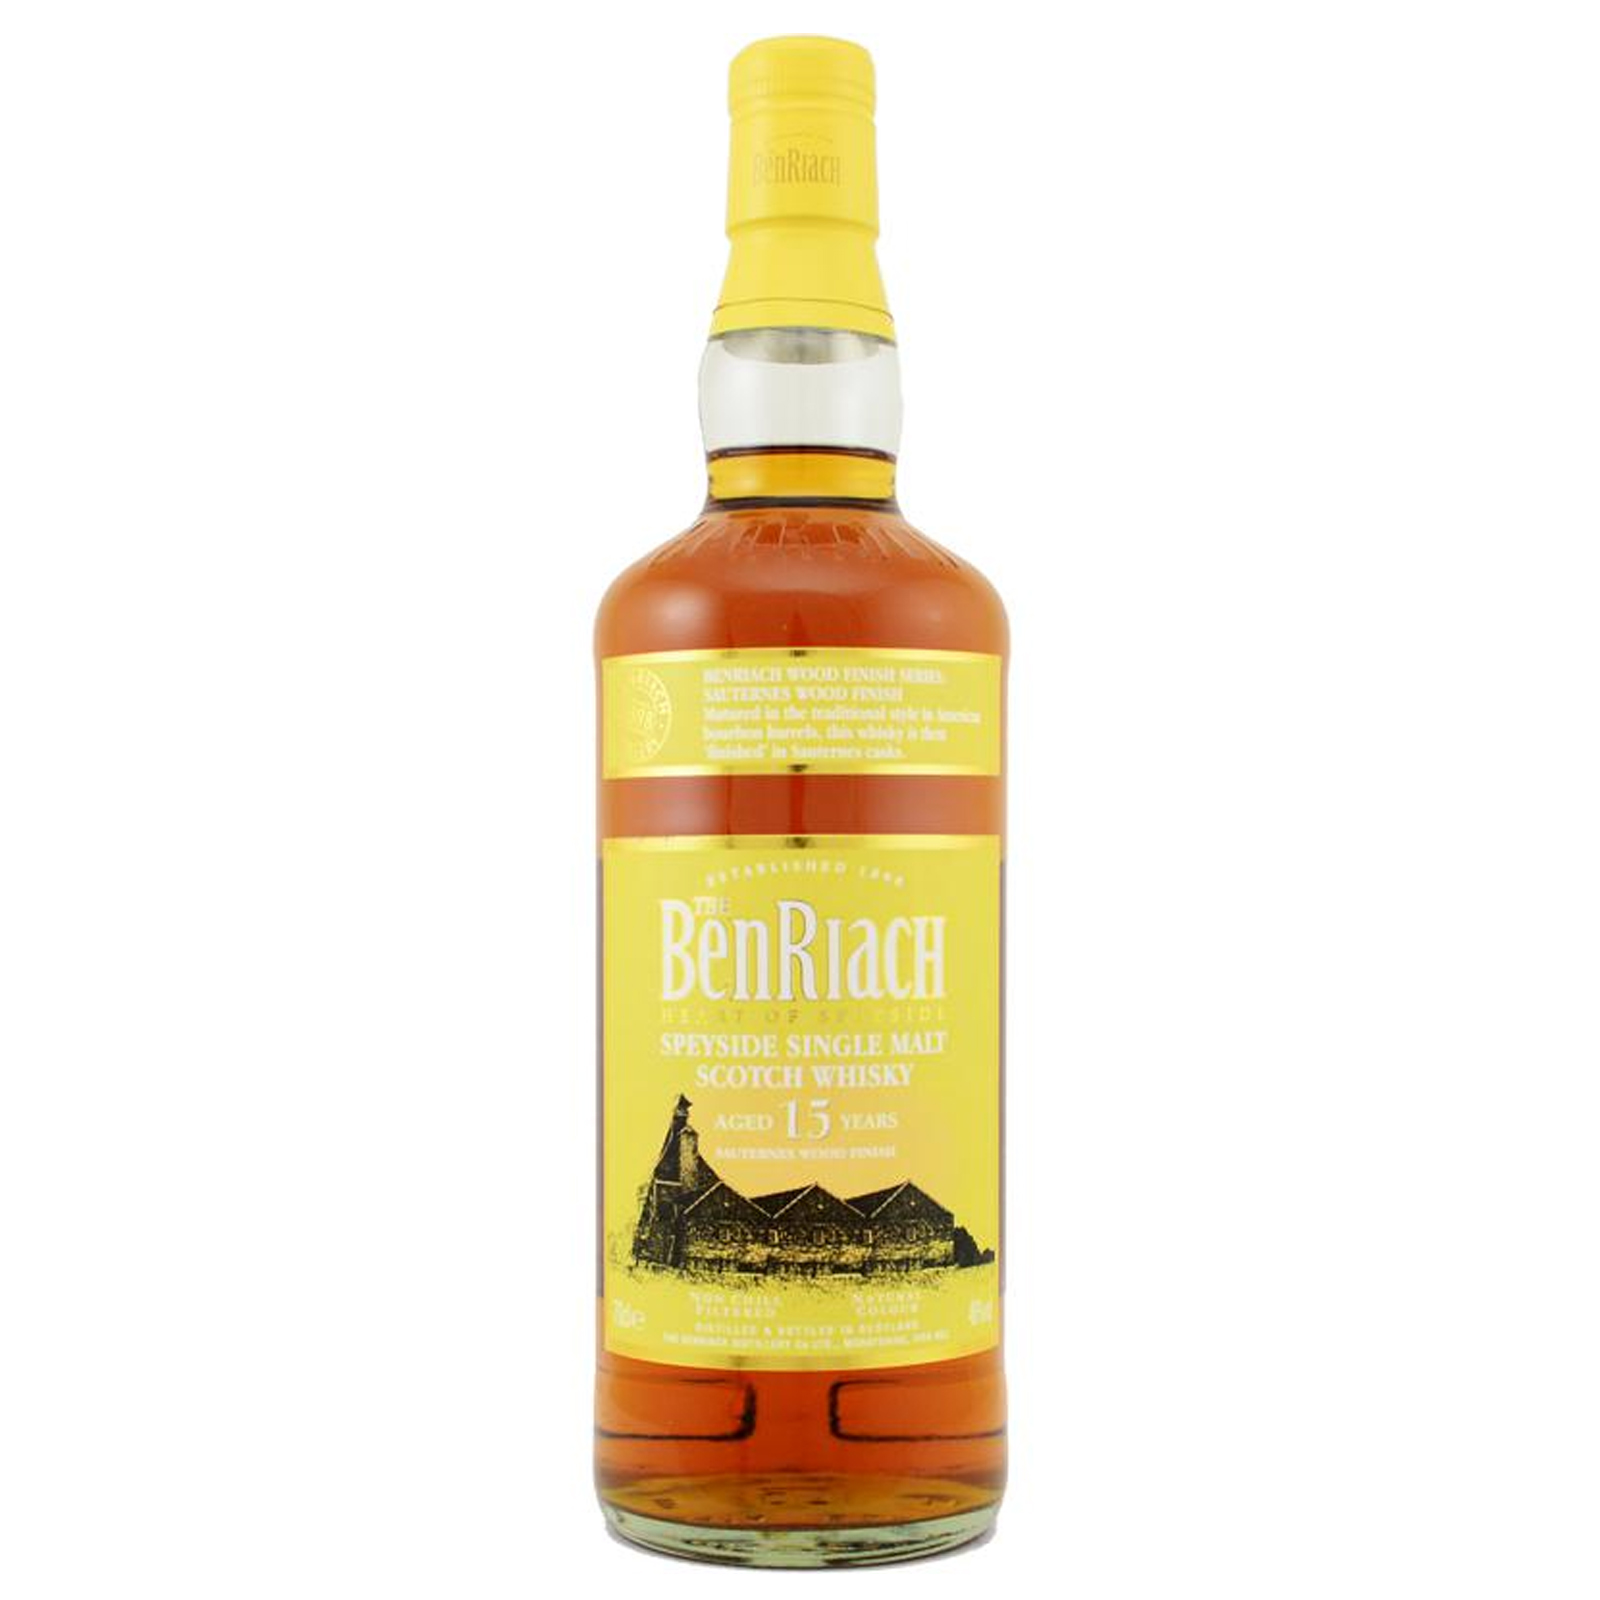 You are currently viewing BenRiach 15 years – Sauternes Finish